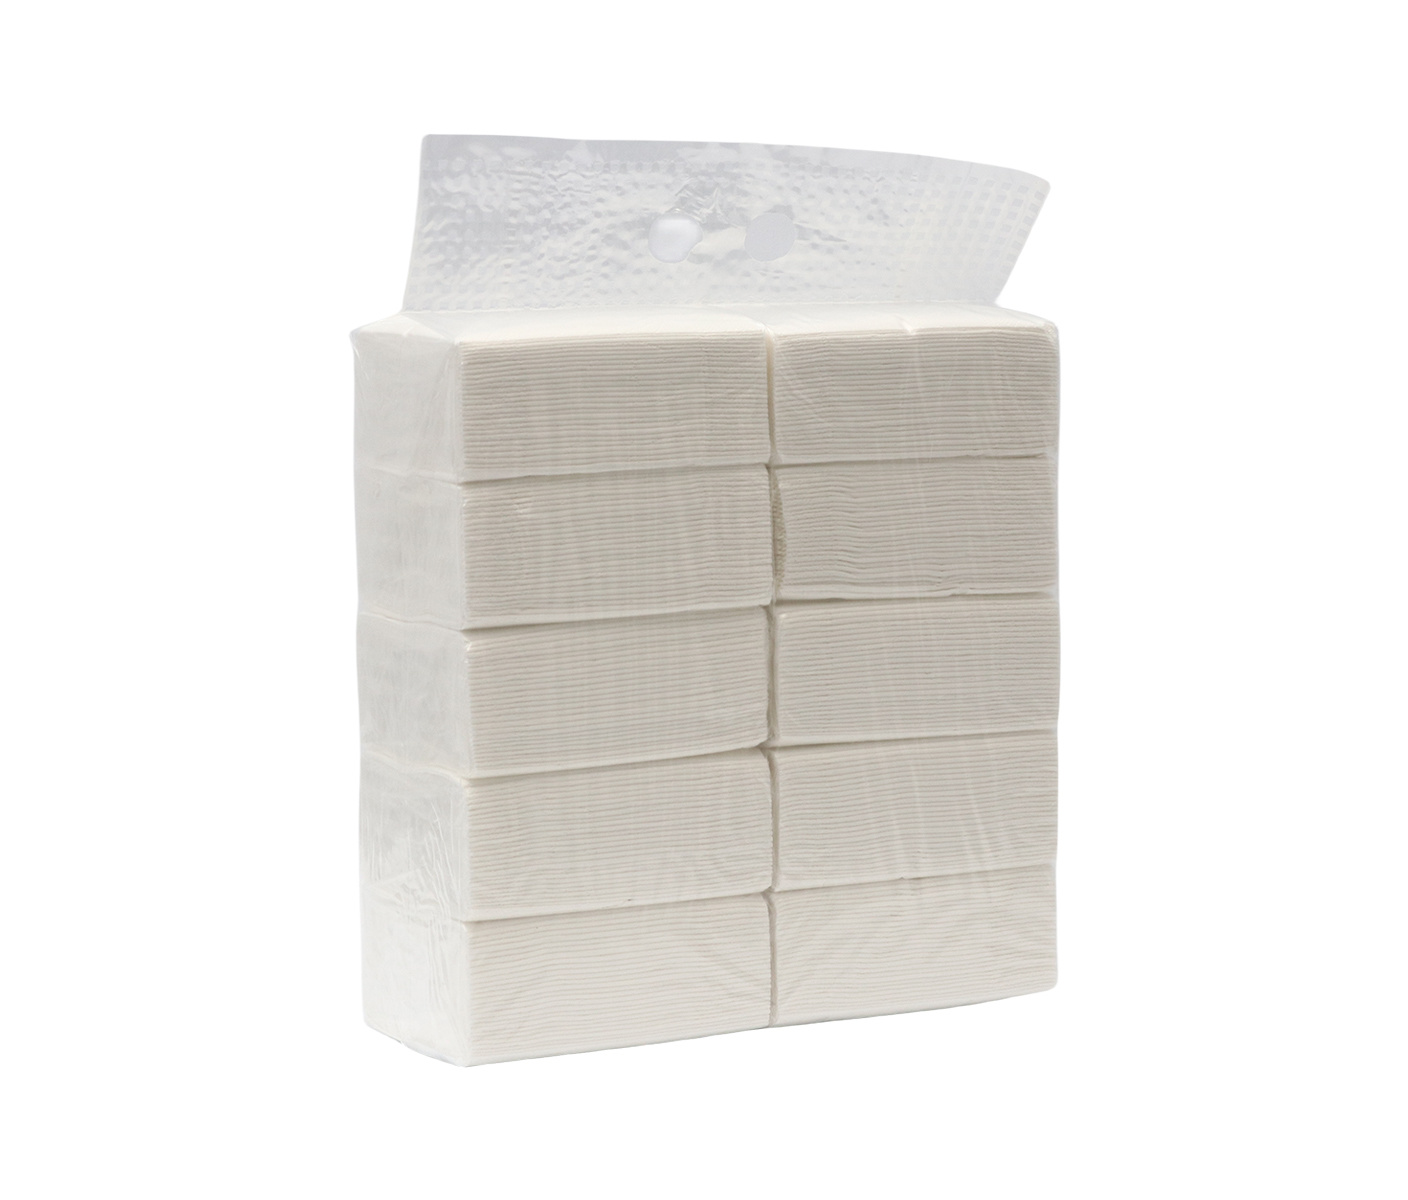 Blank 100 pack of tissue paper